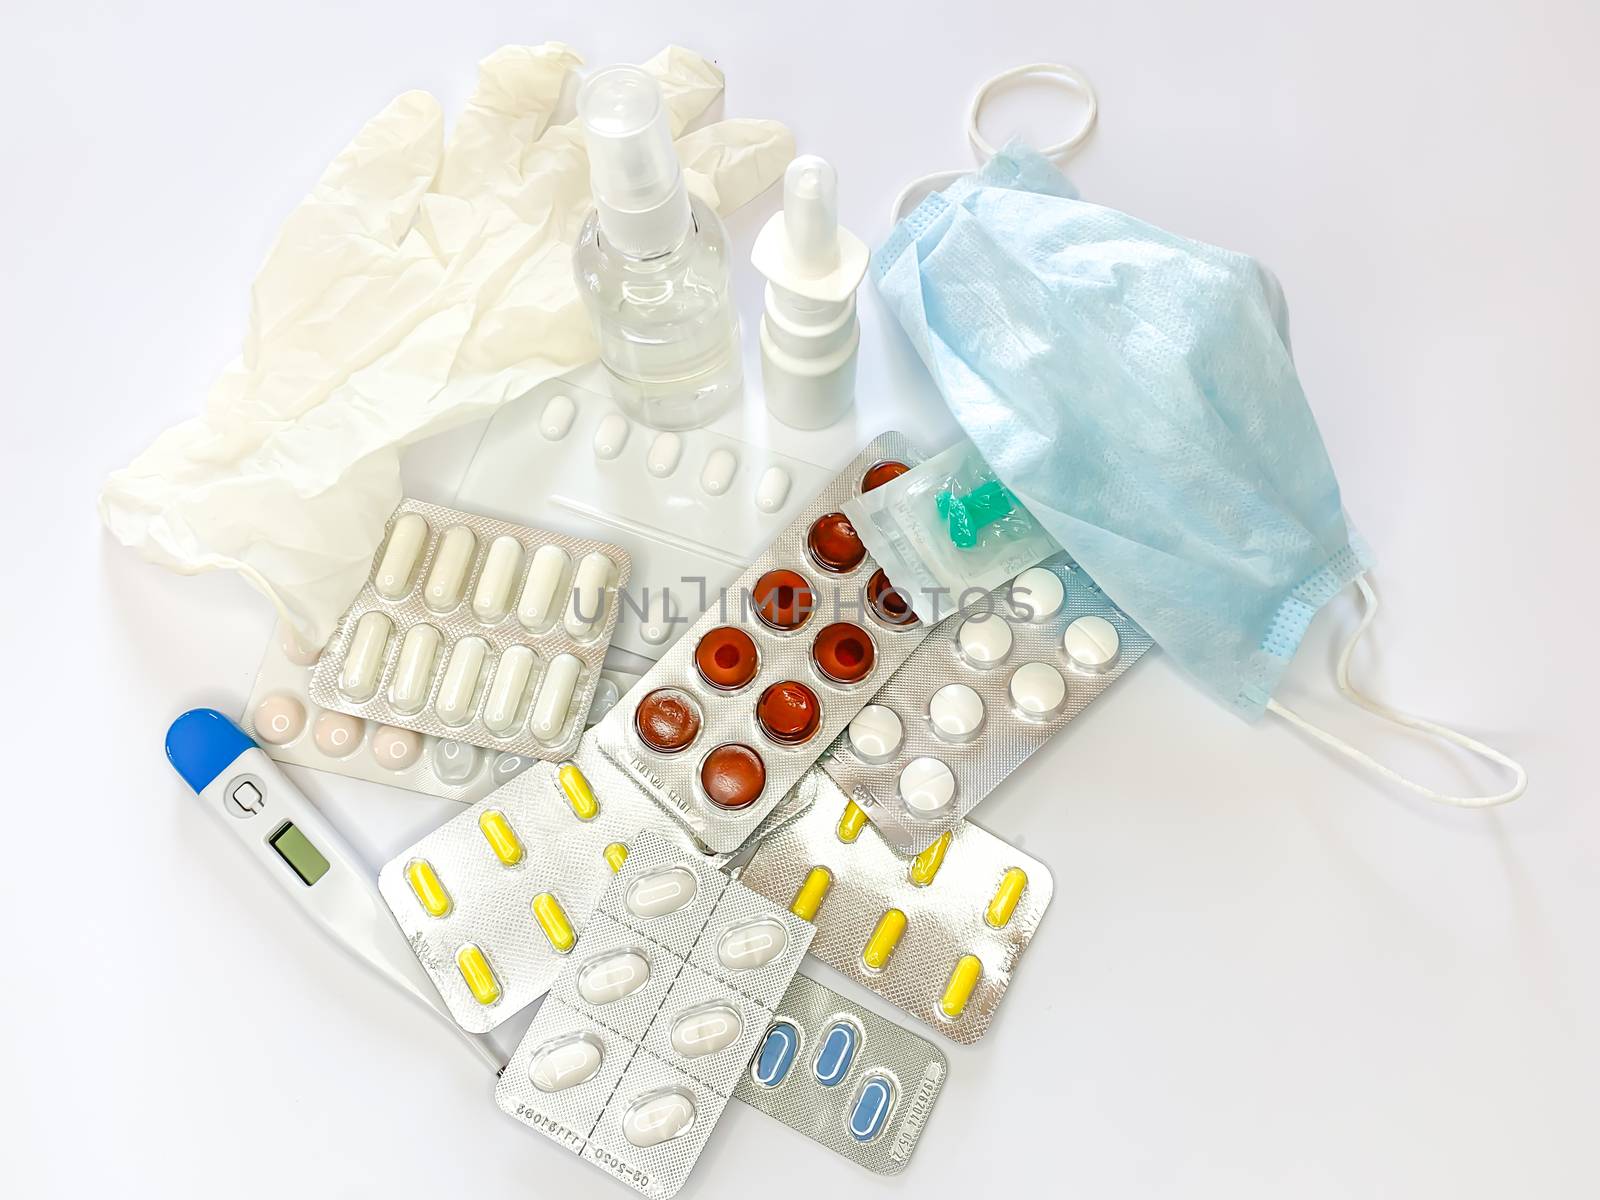 Many different medicines: tablets, pills in blister pack, medications drugs, medical gloves, mask, syringe, thermometer, spray, sanitizer on a white background. Horizontal photo